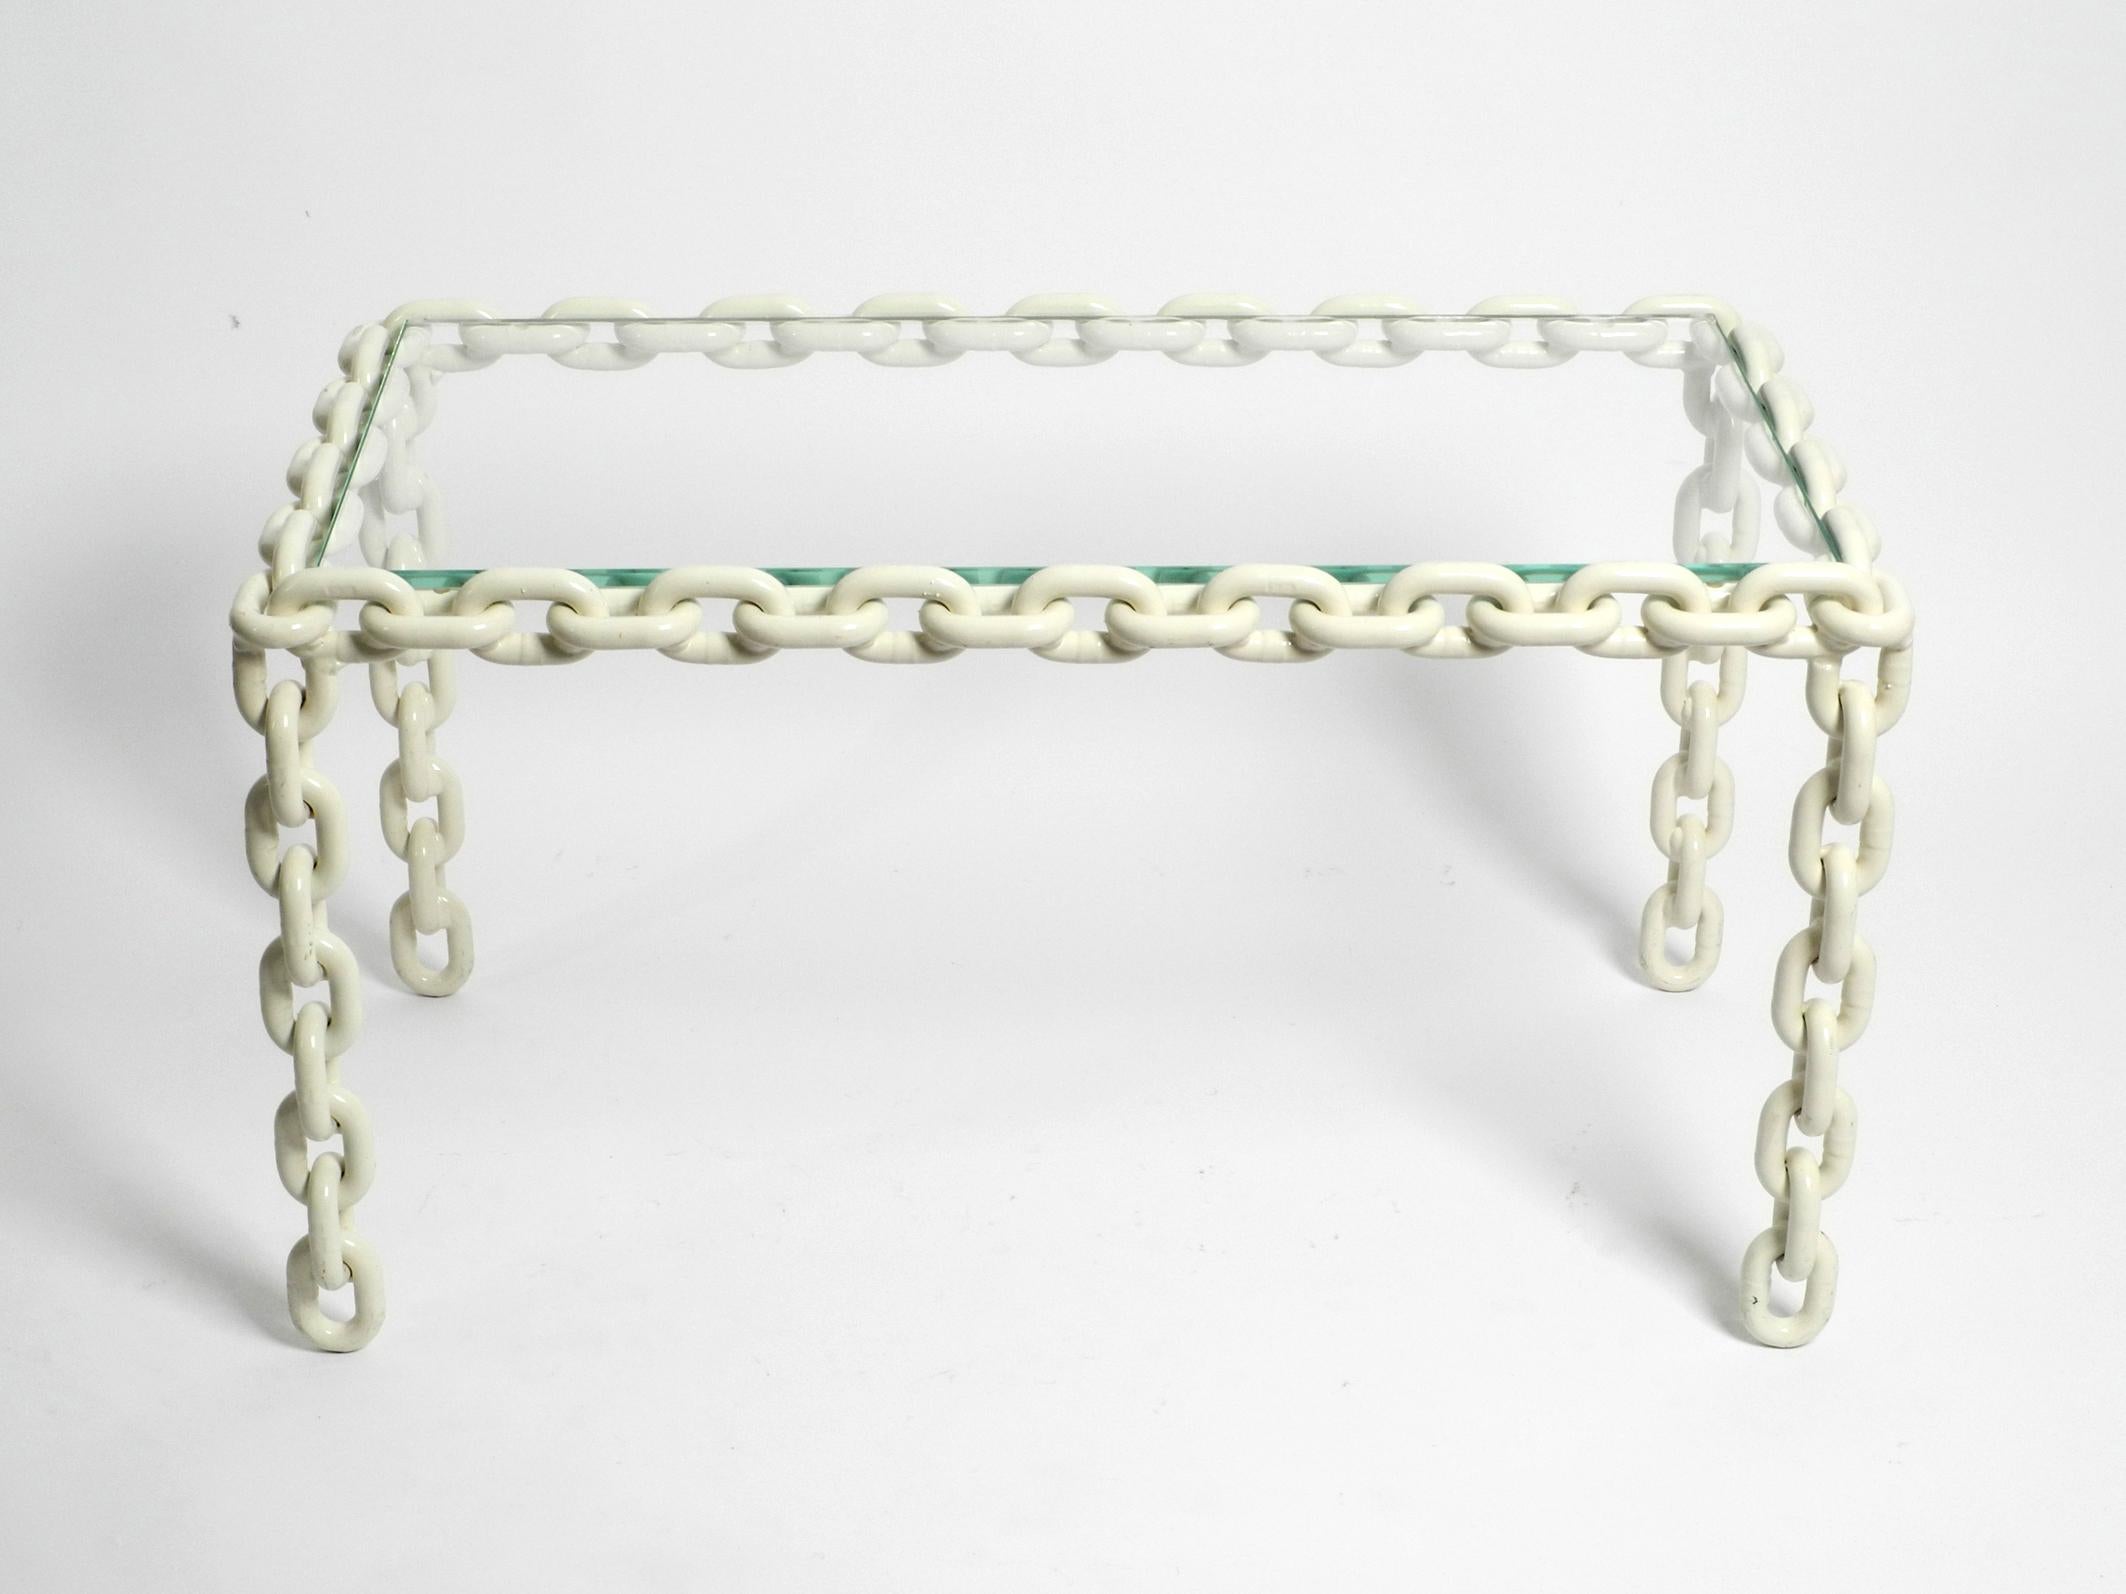 Beautiful, very rare and heavy coffee or side table made of white lacquered heavy maritime ship chains welded together.
The plate above is a cut thick clear glass in very good condition.
Great brutalist design from the 1970s. Manufacturer is